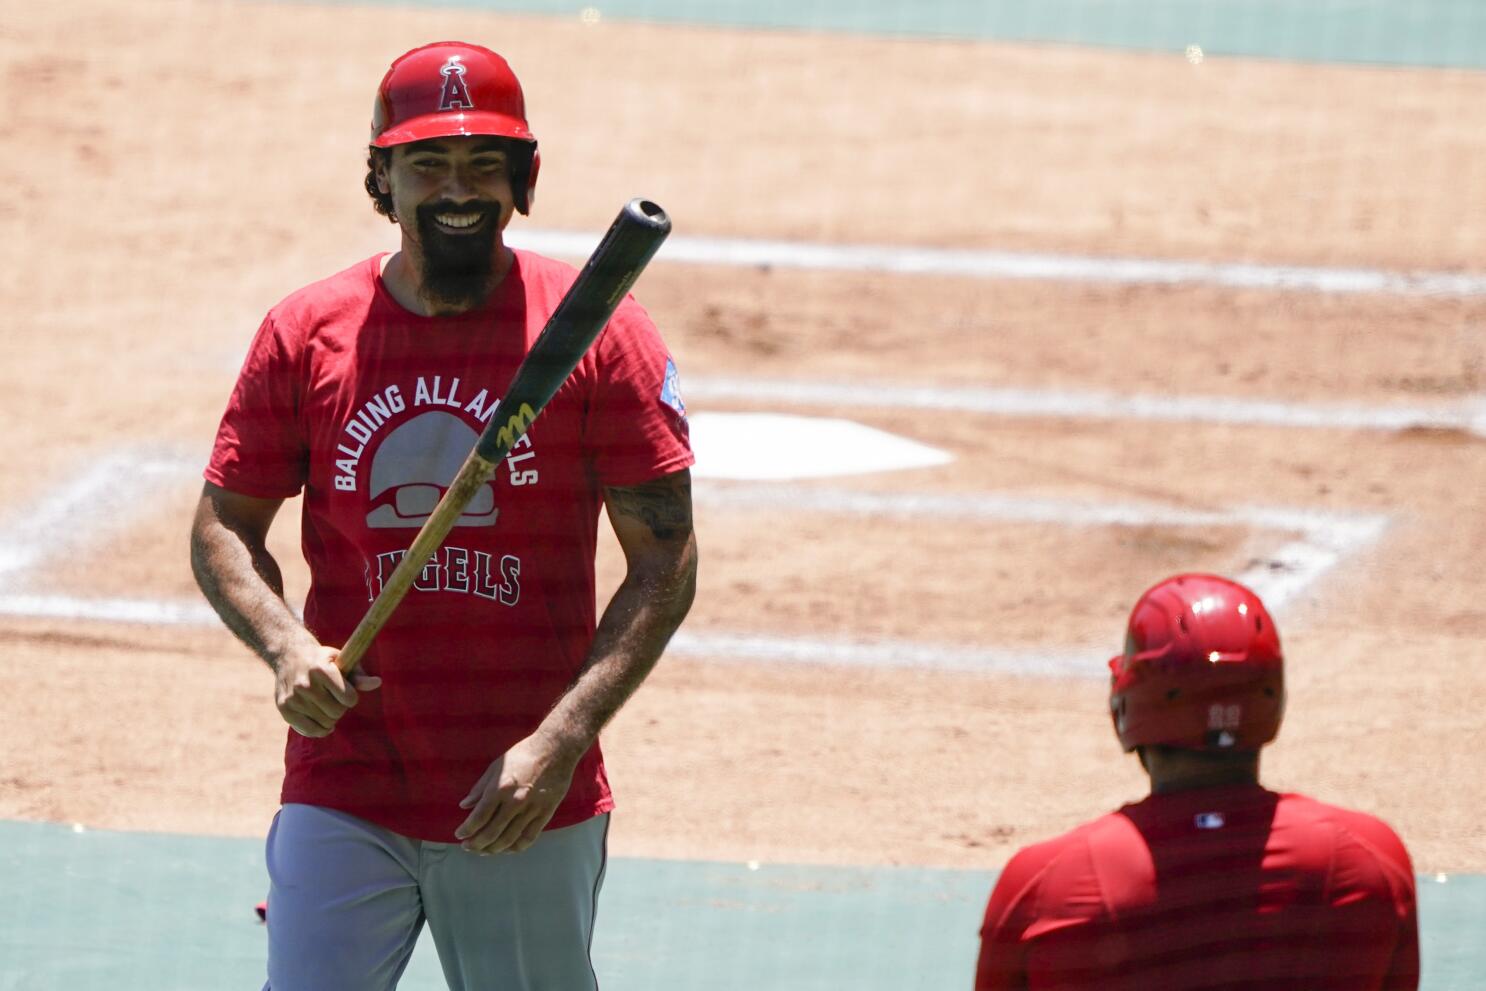 Angels star Anthony Rendon speaks out on facing former team in Nationals